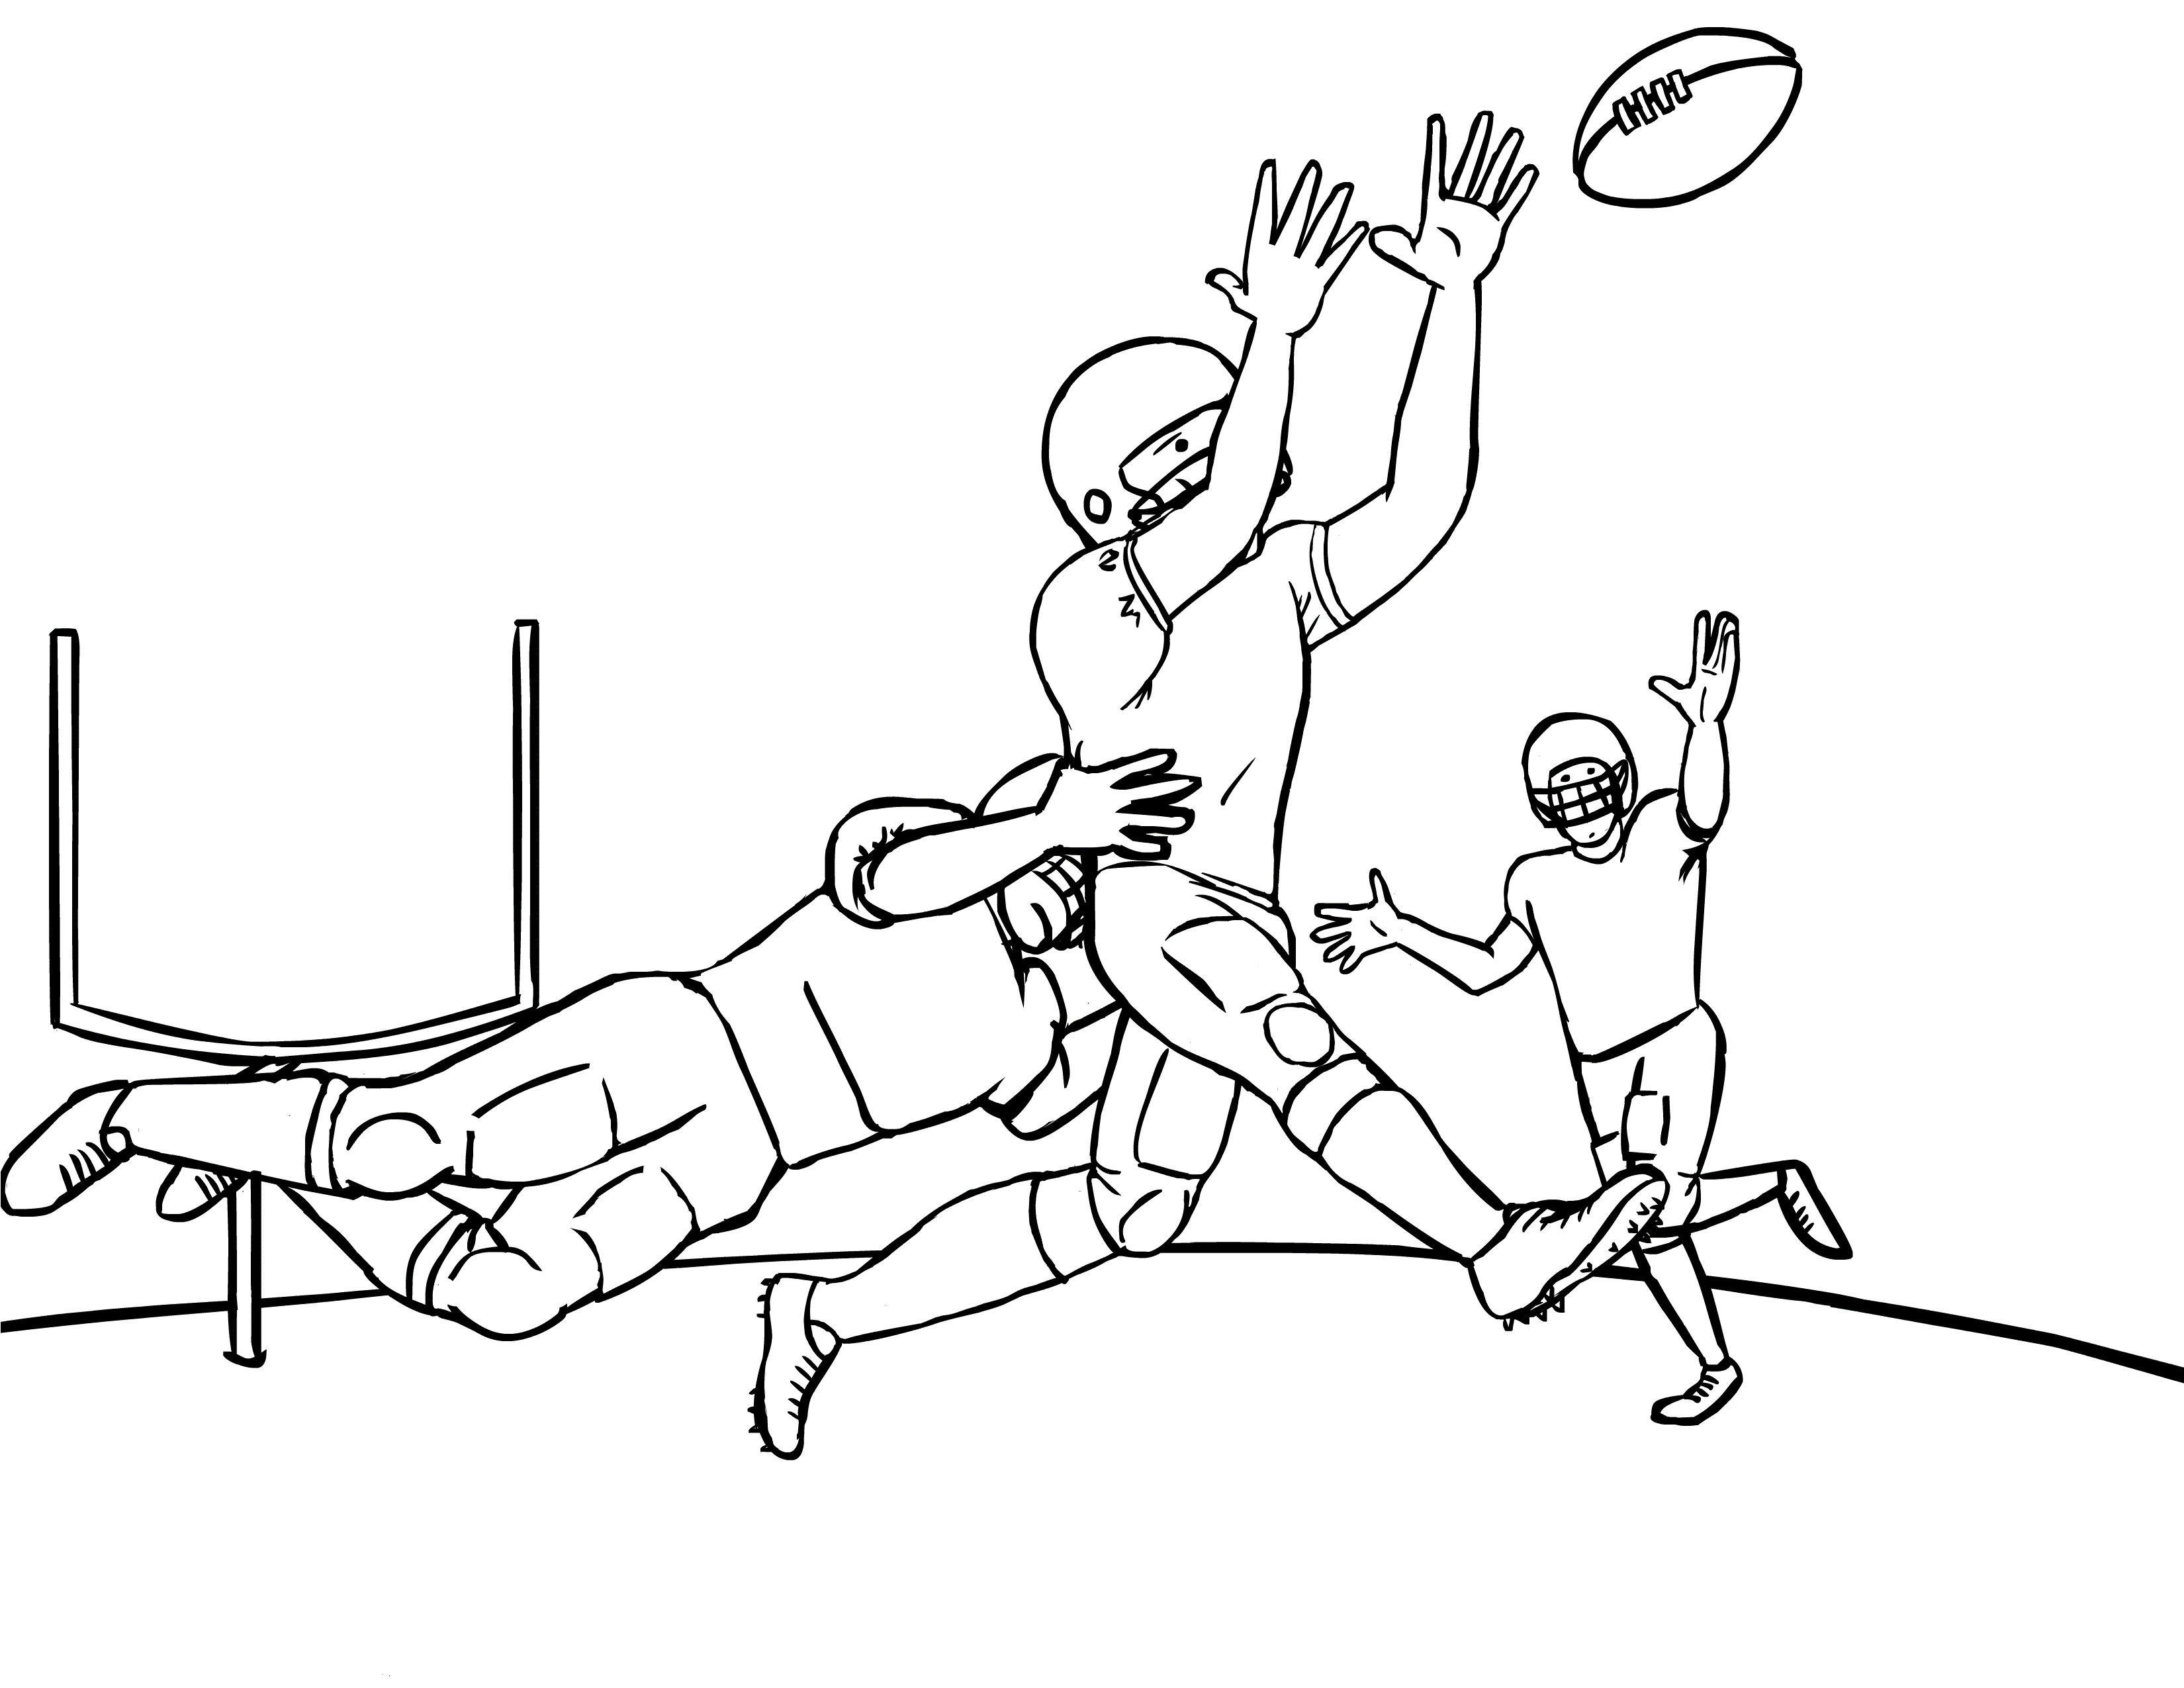 football coloring pages free printable free printable football coloring pages for kids best coloring pages printable free football 